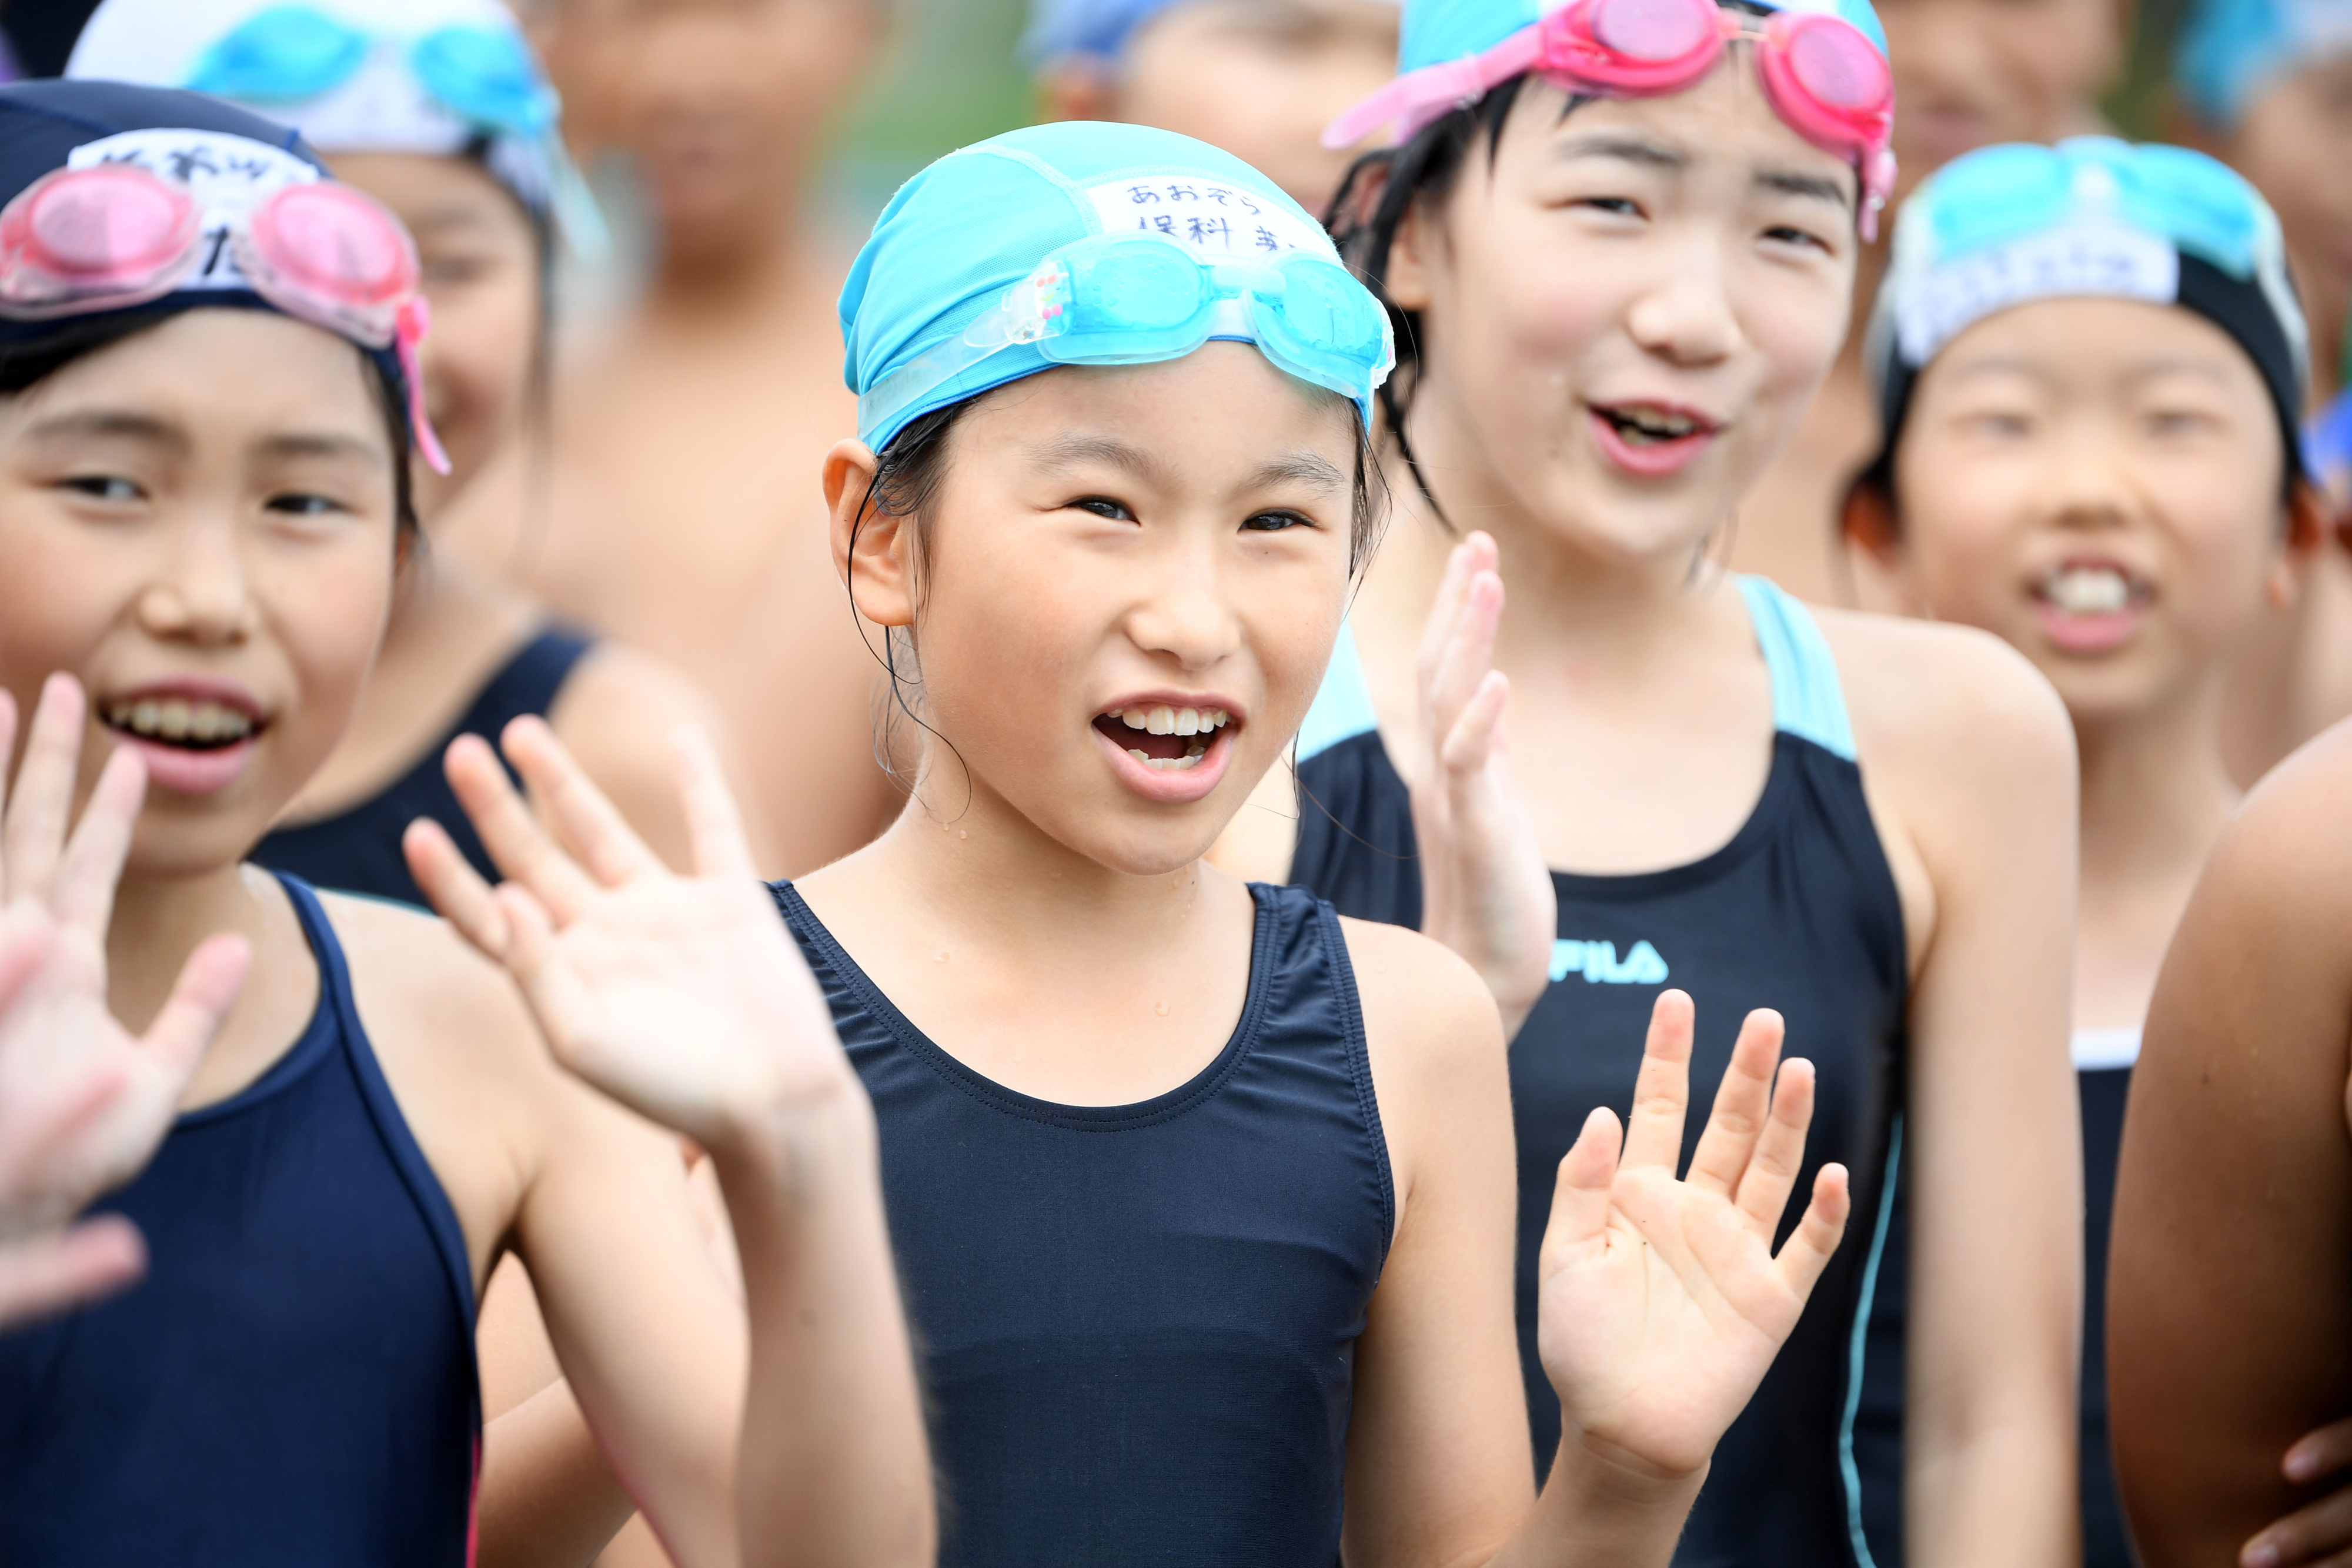 Group of children in swim caps smiling and waving at the camera, suggesting a friendly or welcoming travel-related event